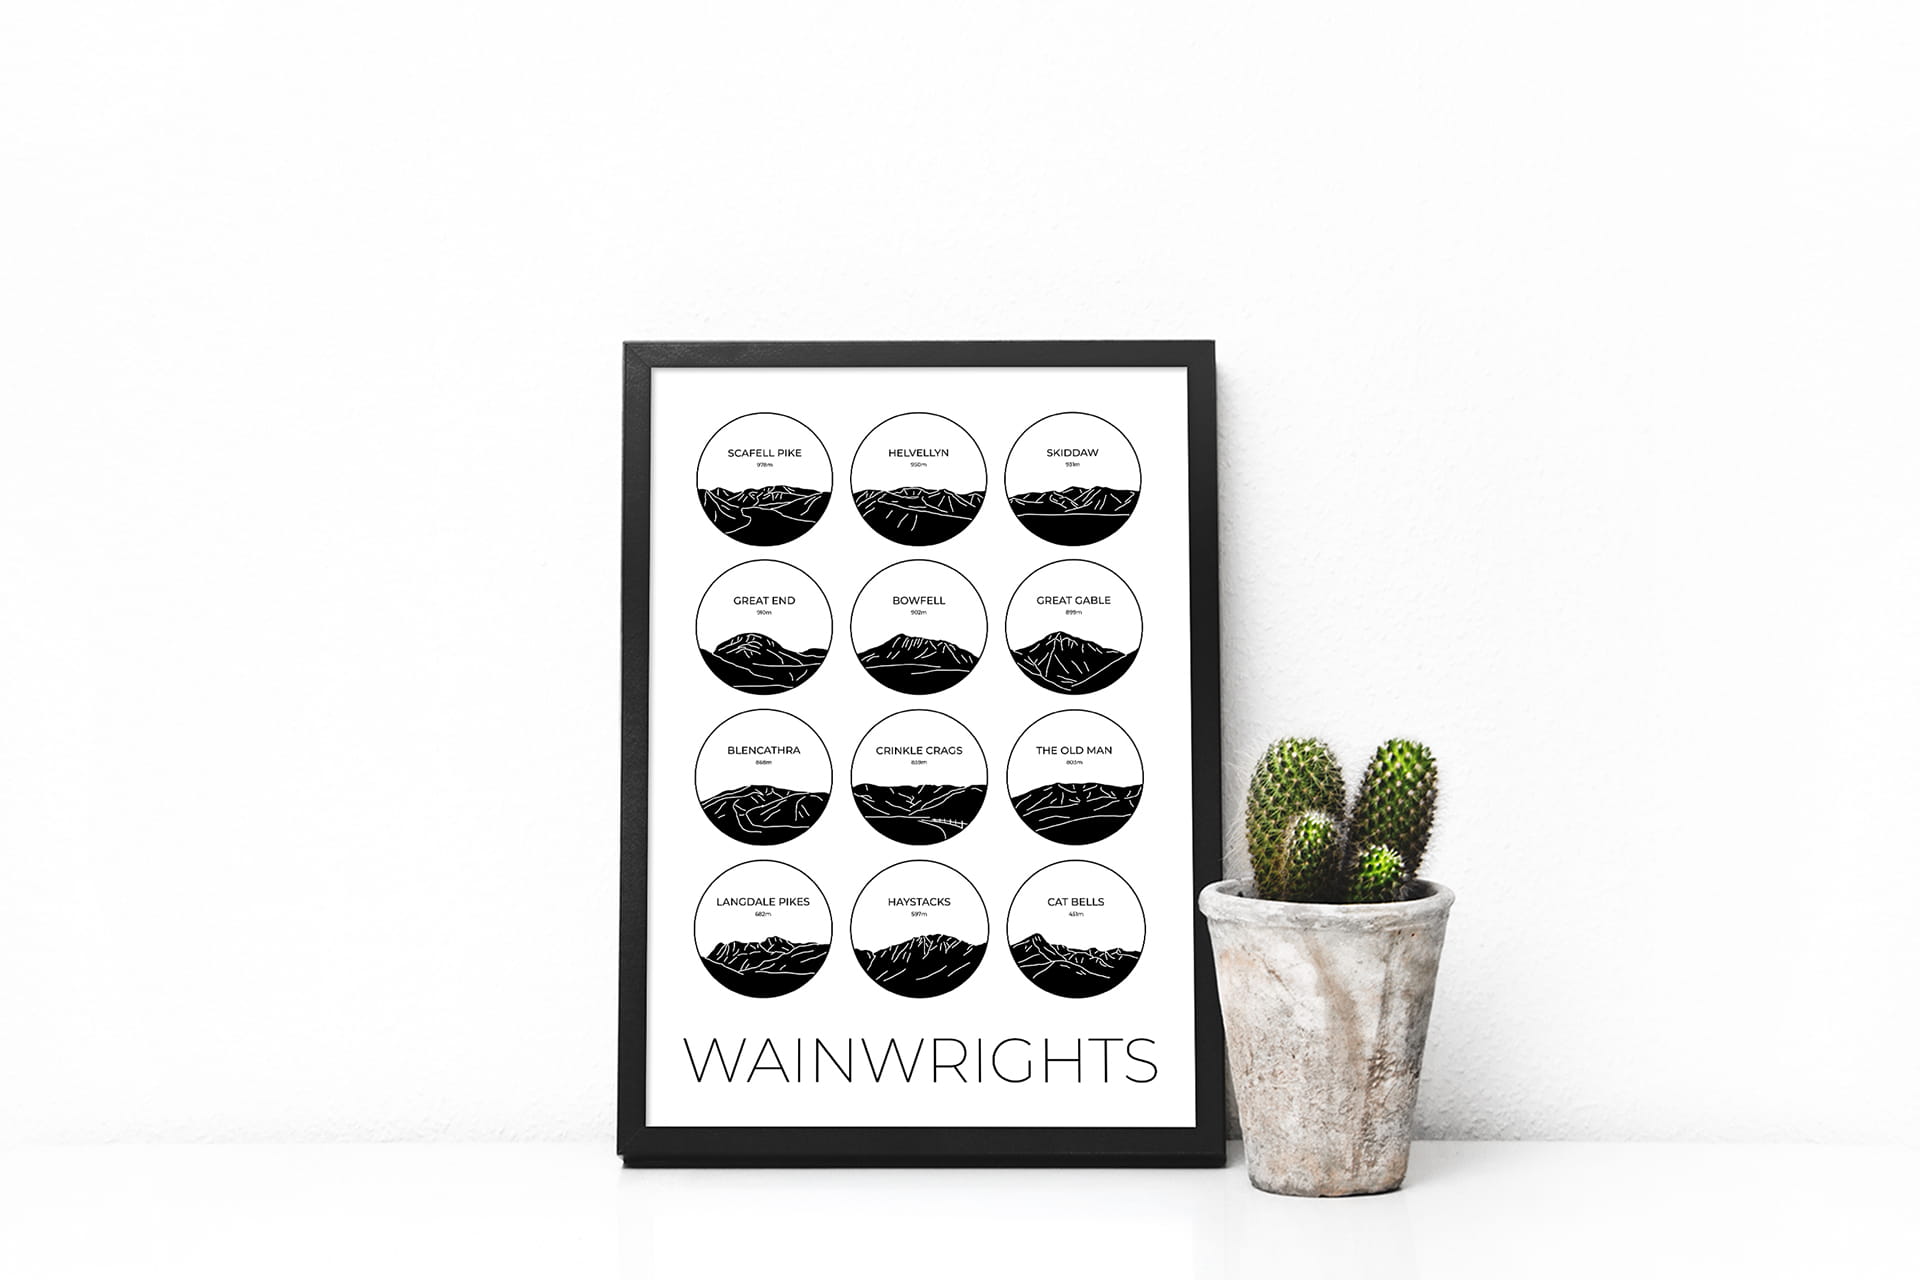 Wainwrights collage light art print in a picture frame